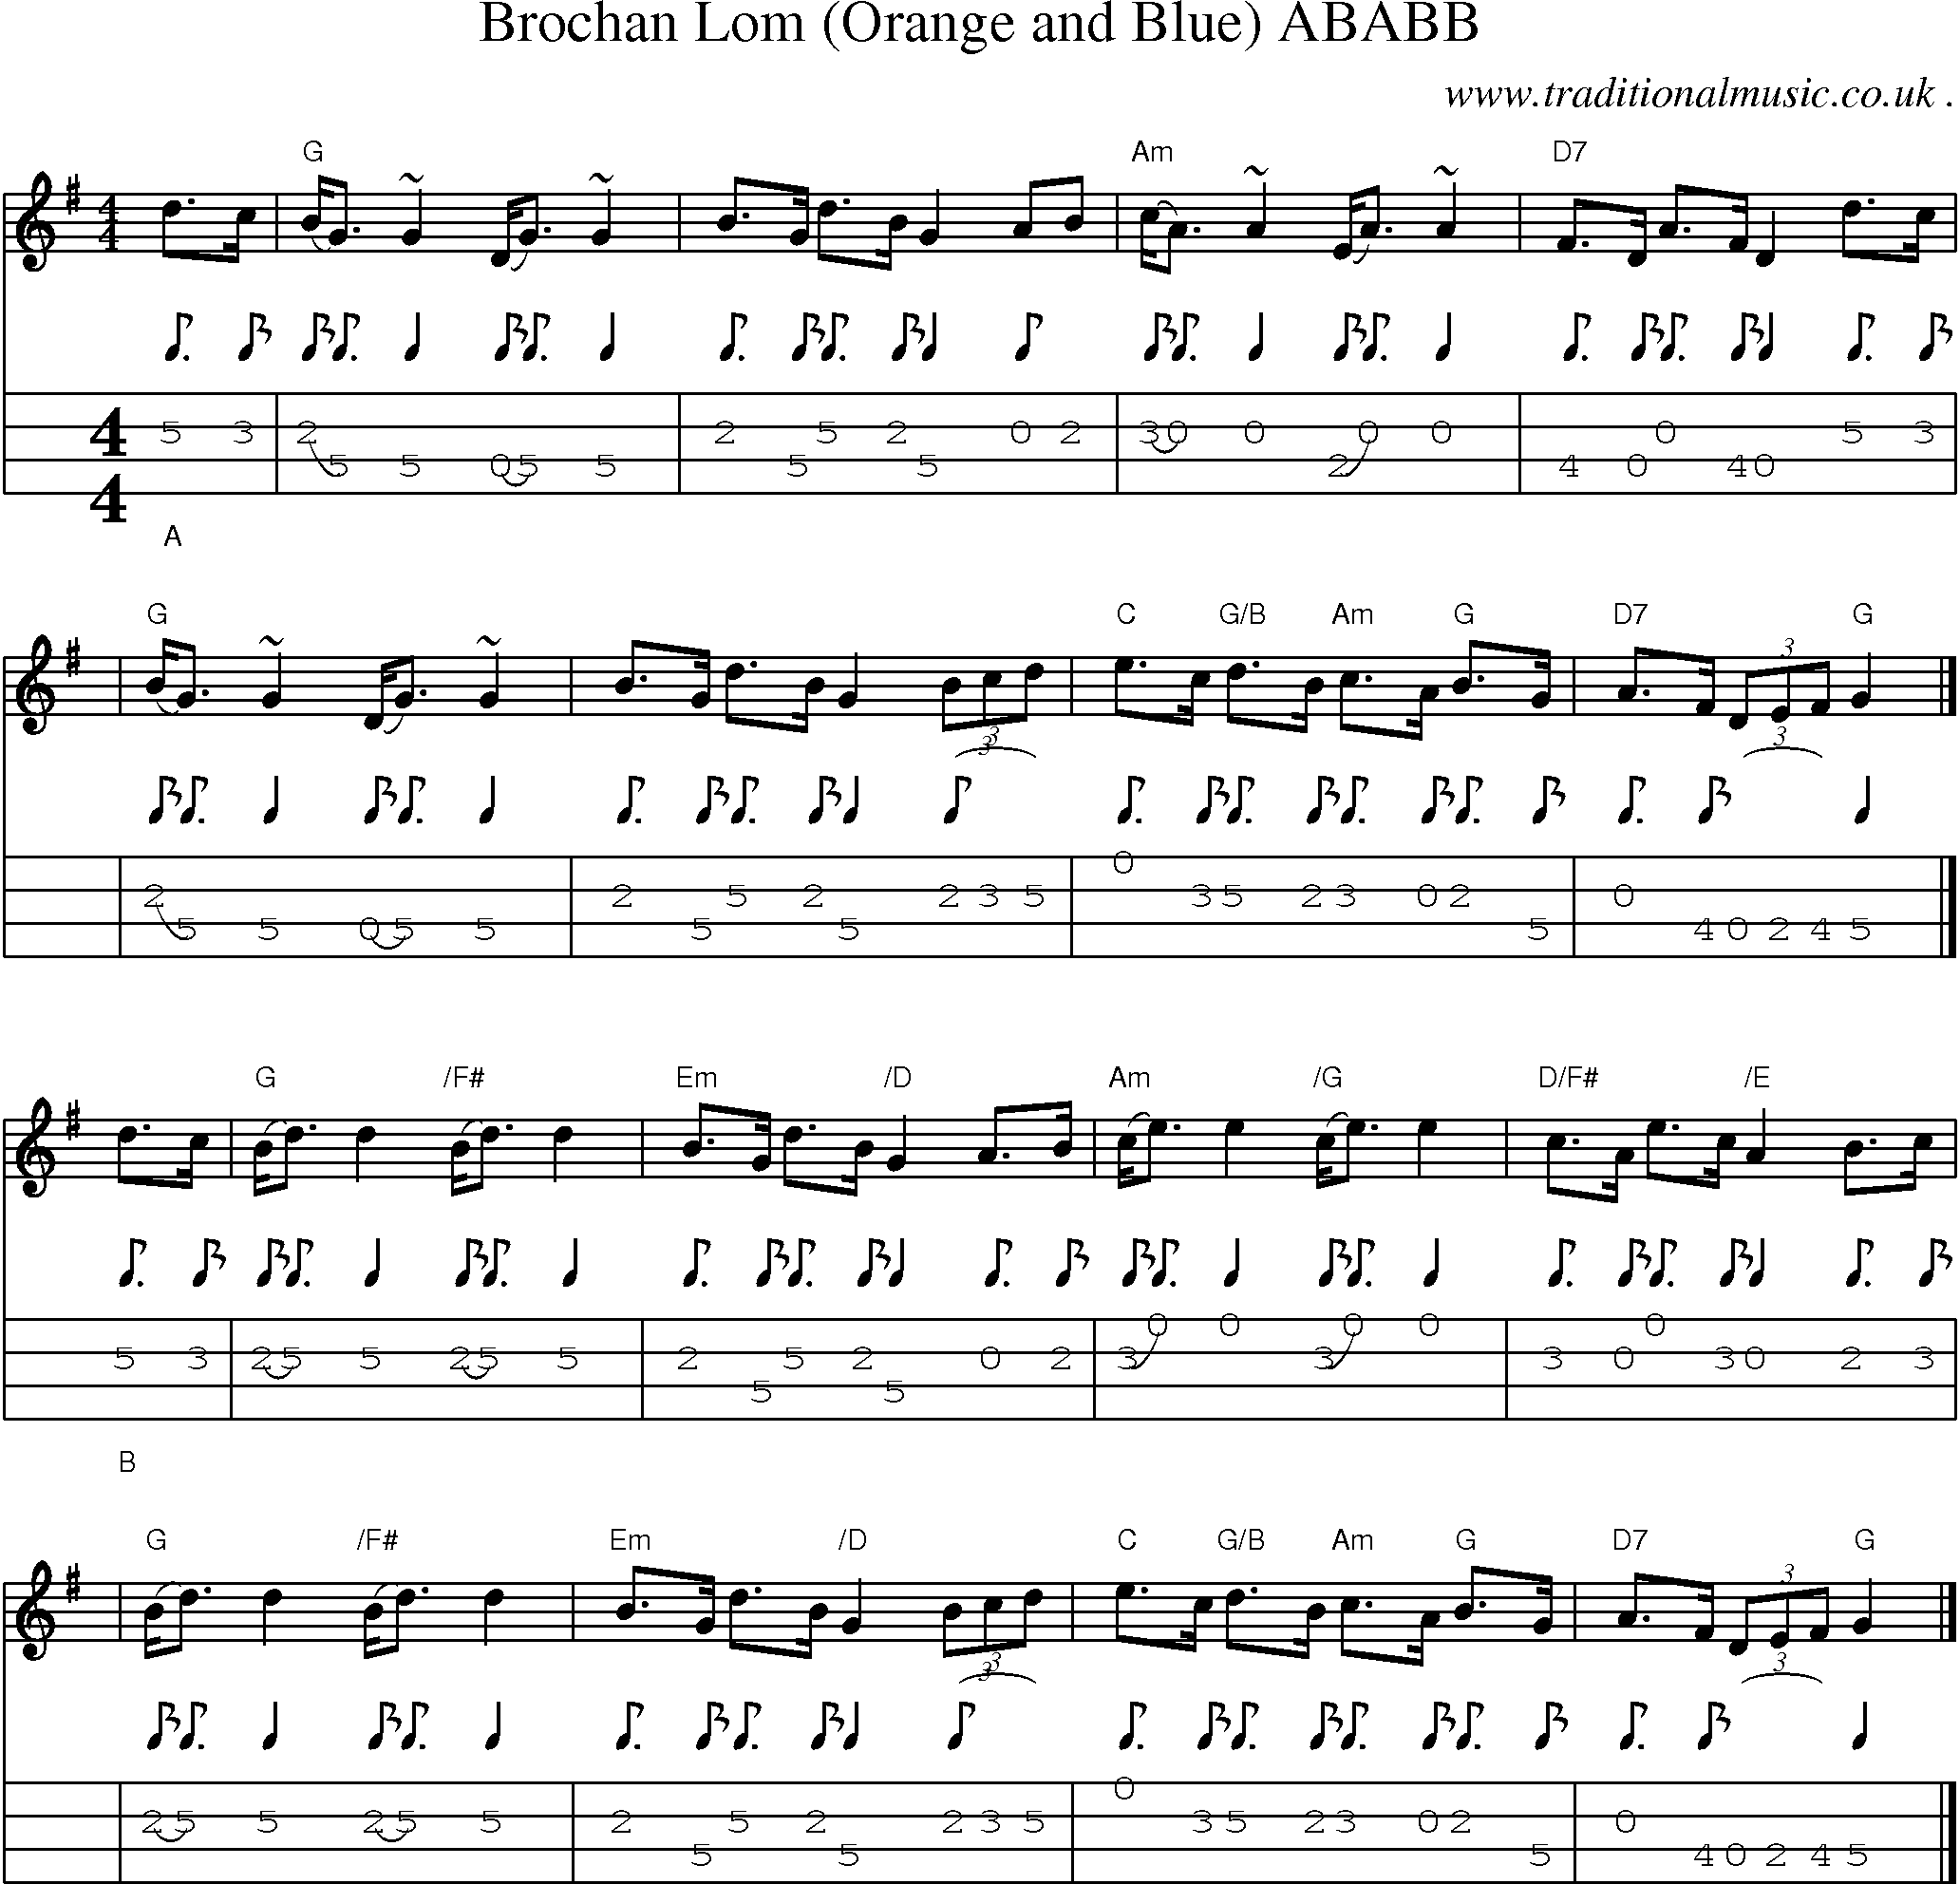 Sheet-music  score, Chords and Mandolin Tabs for Brochan Lom Orange And Blue Ababb